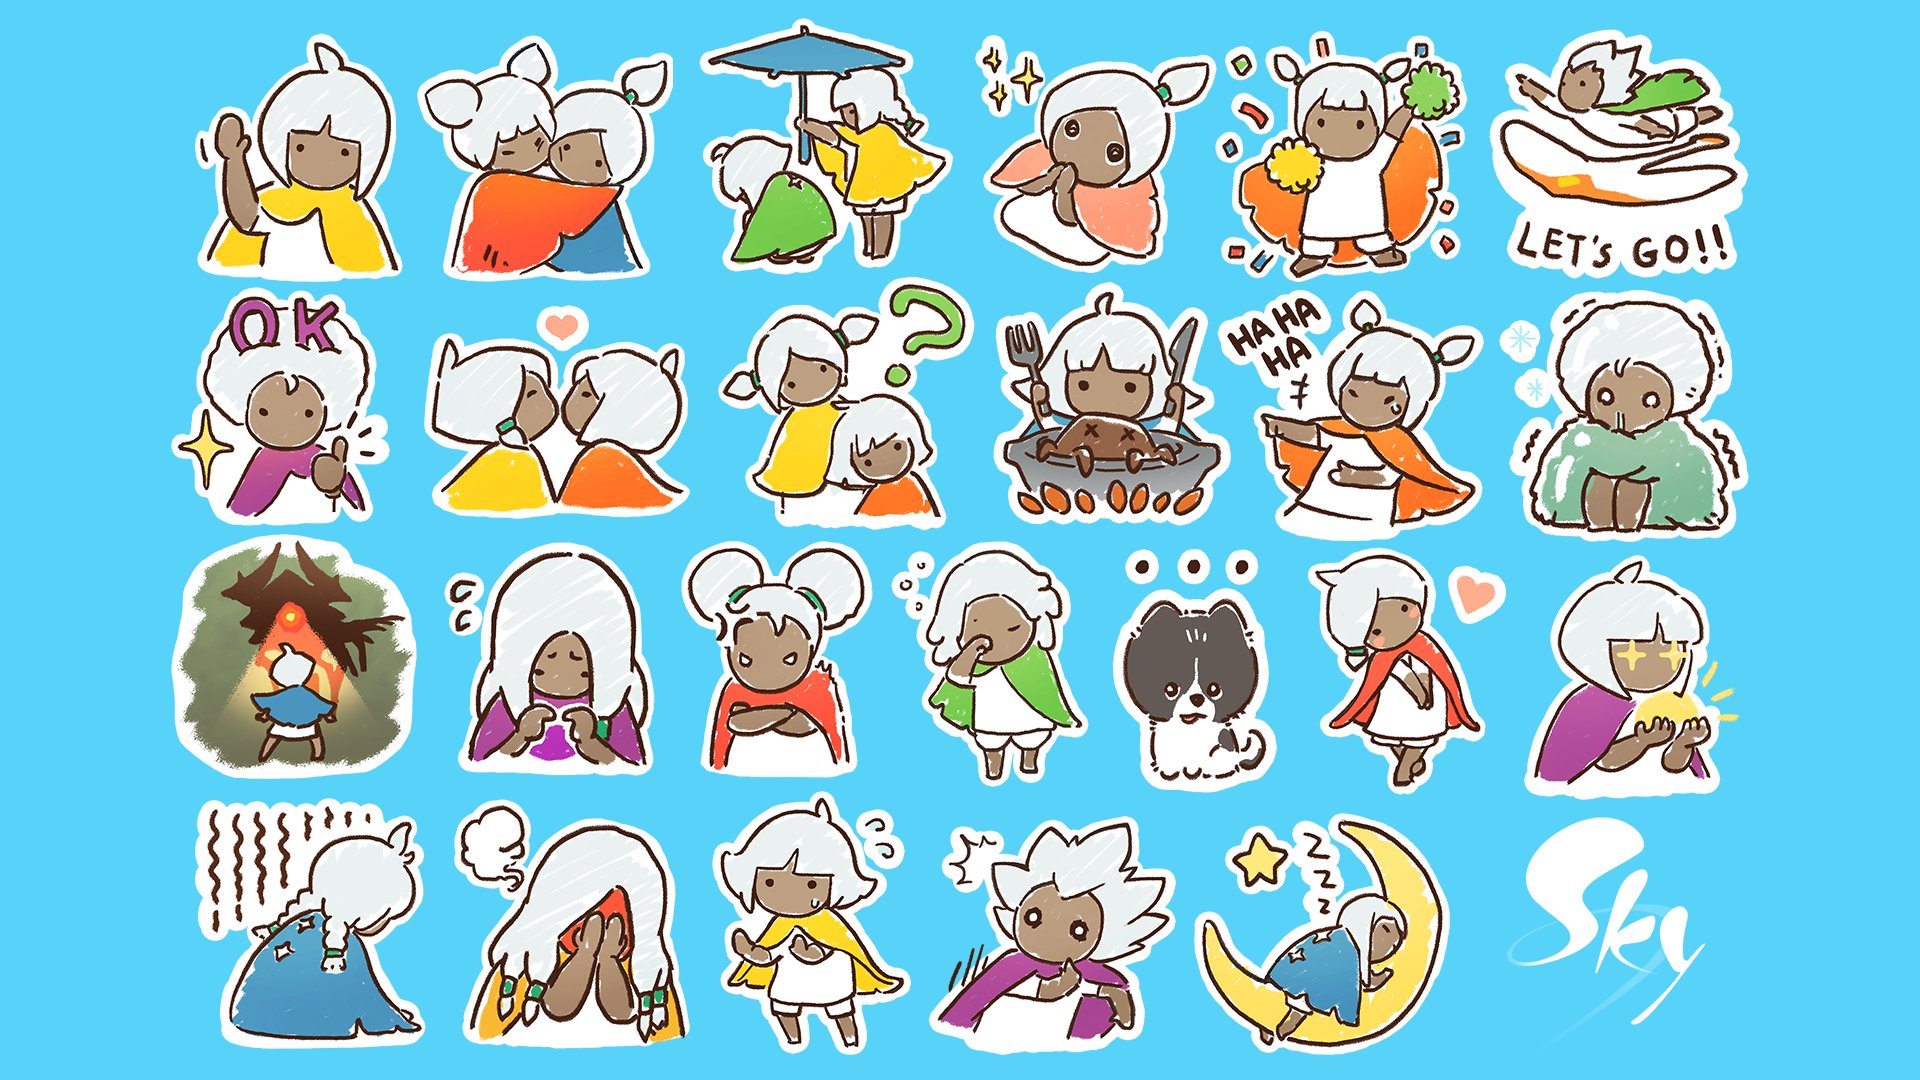 Sky Children Of The Light A Twitter Our Official Thatskygame Chat Stickers Are Now Available On Line Please Enjoy And Share With Your Friends And Family 24 Total Stickers Not Free